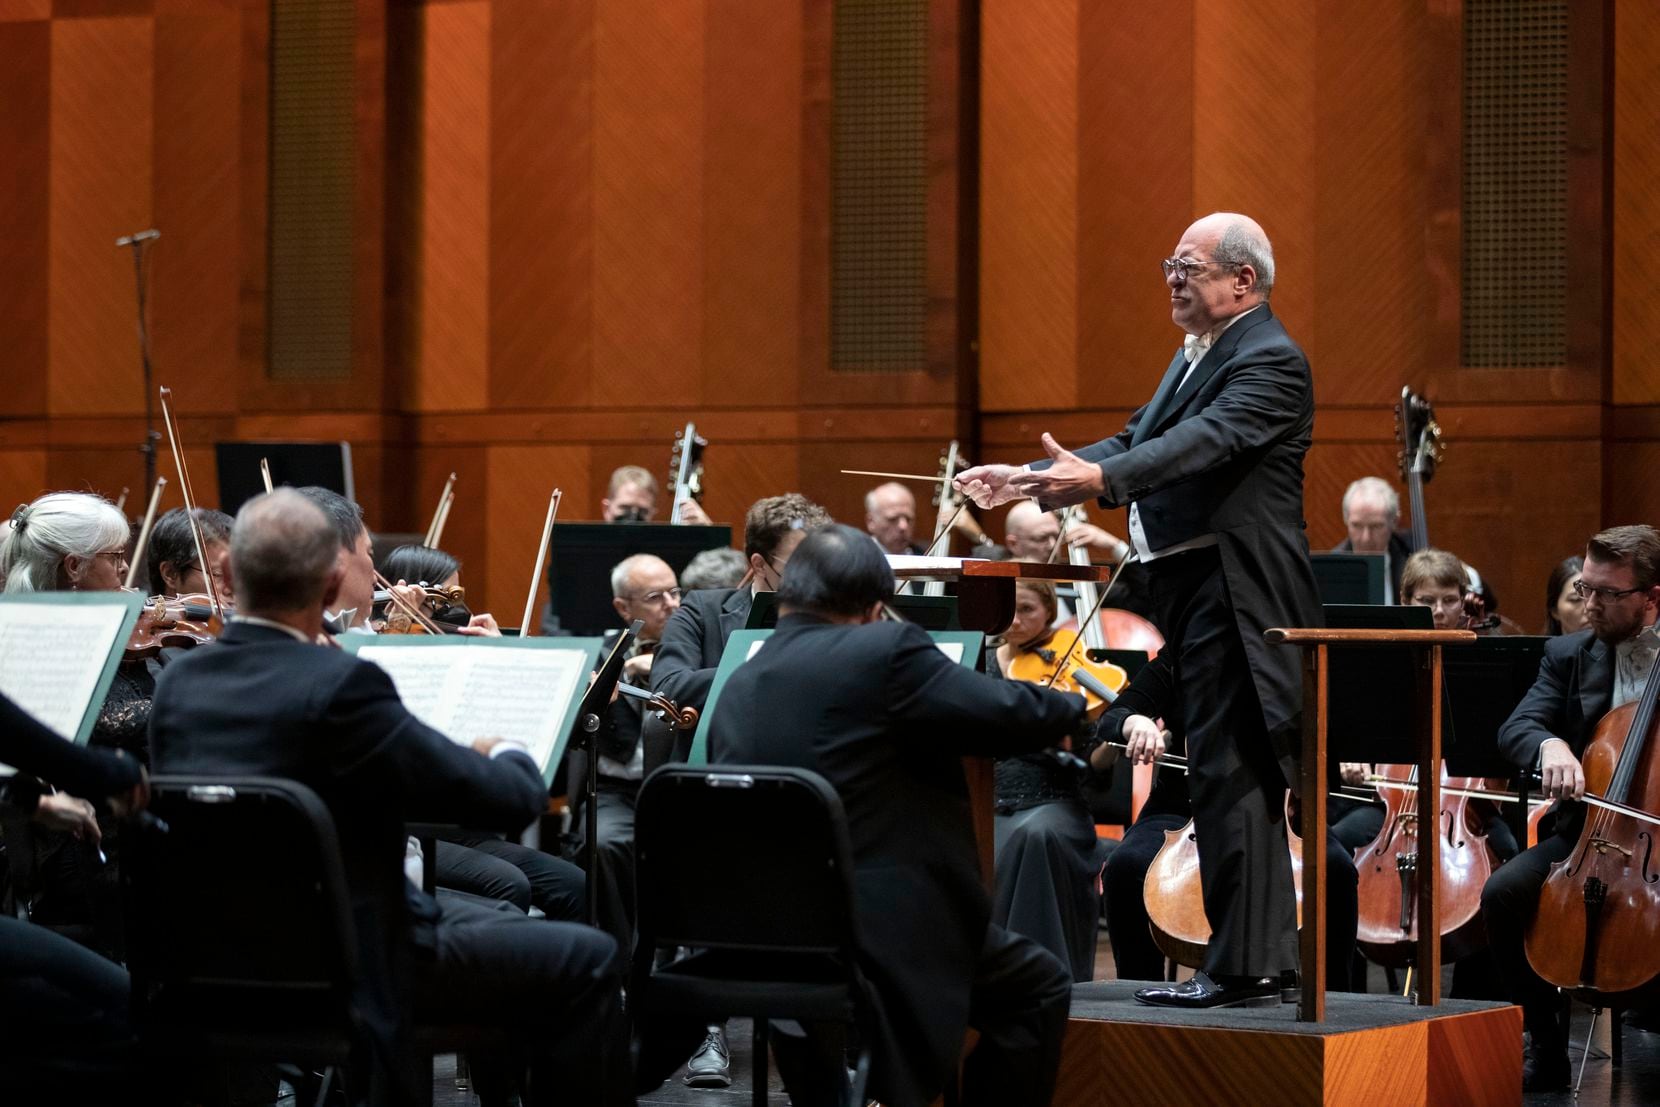 Robert Spano makes a splendid debut as the Fort Worth Symphony’s new music director